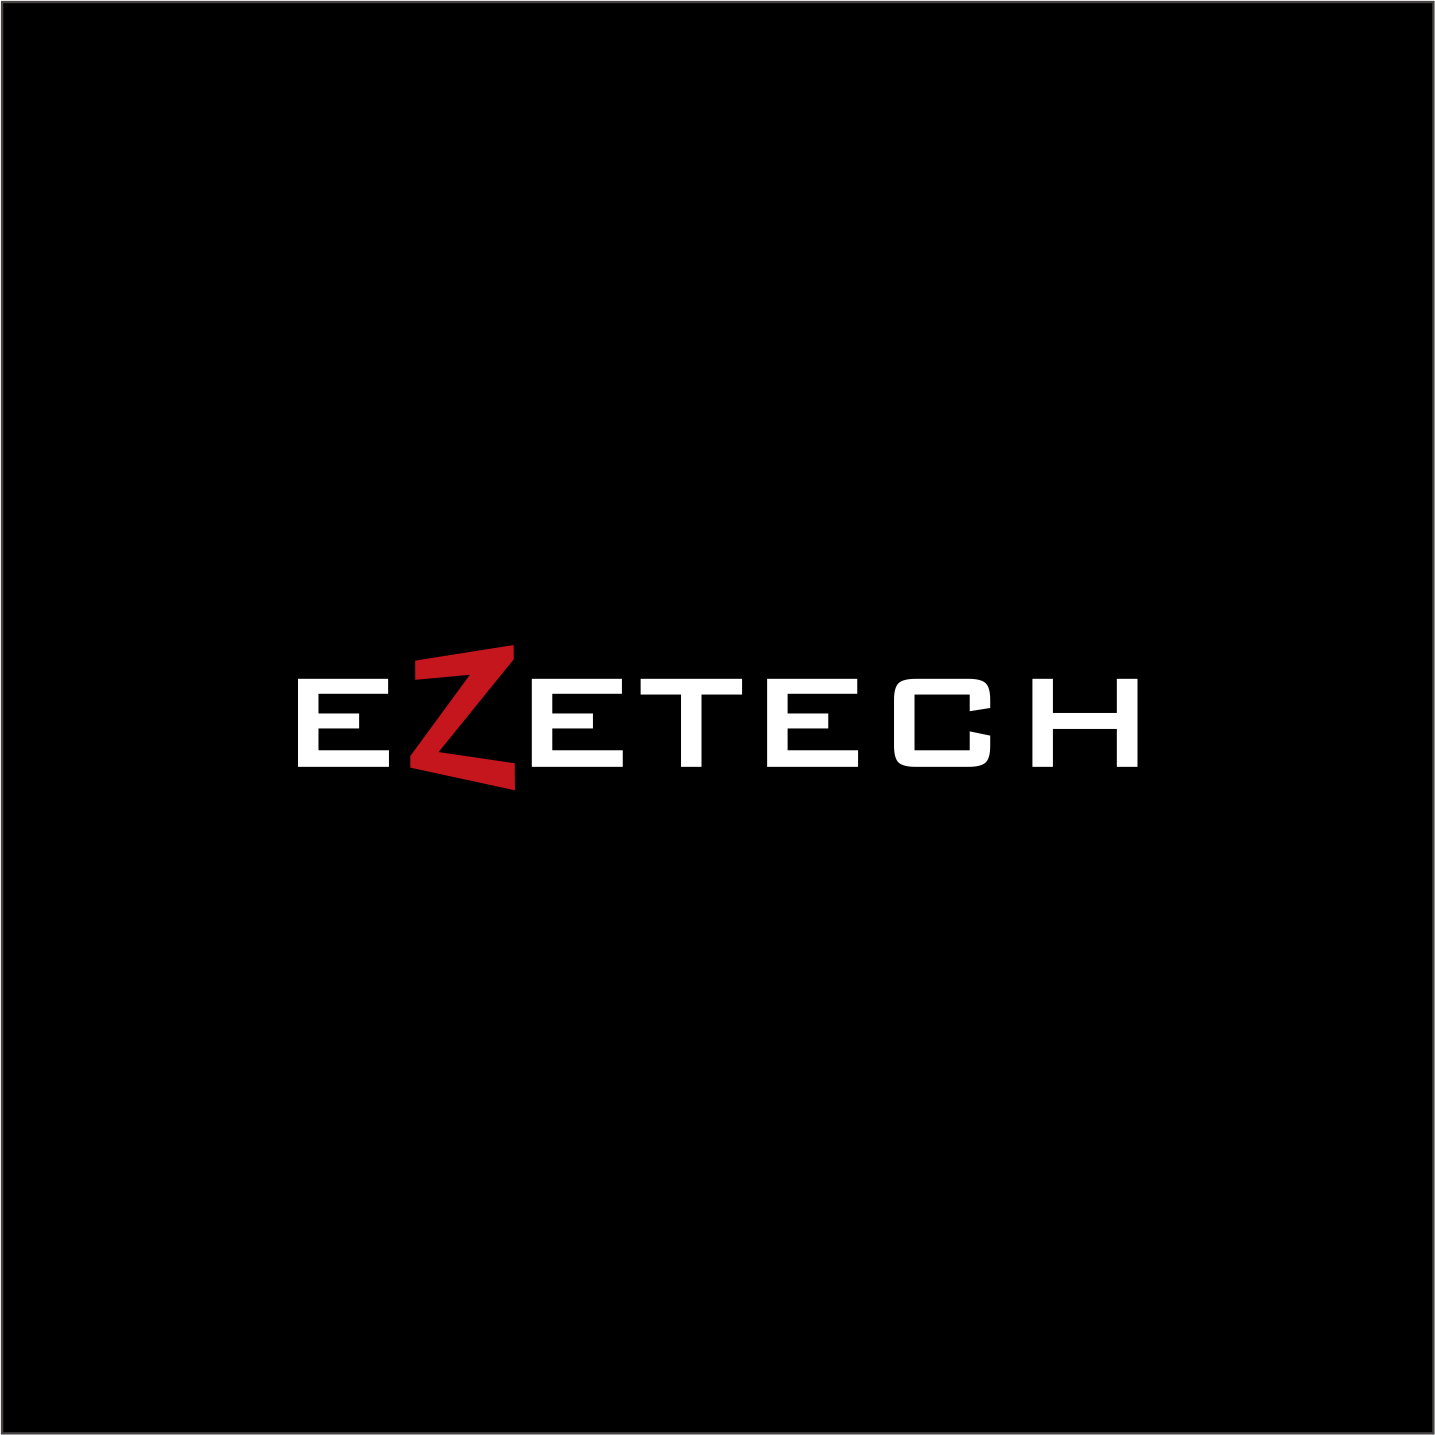 Ezetech Qualified.One in New York